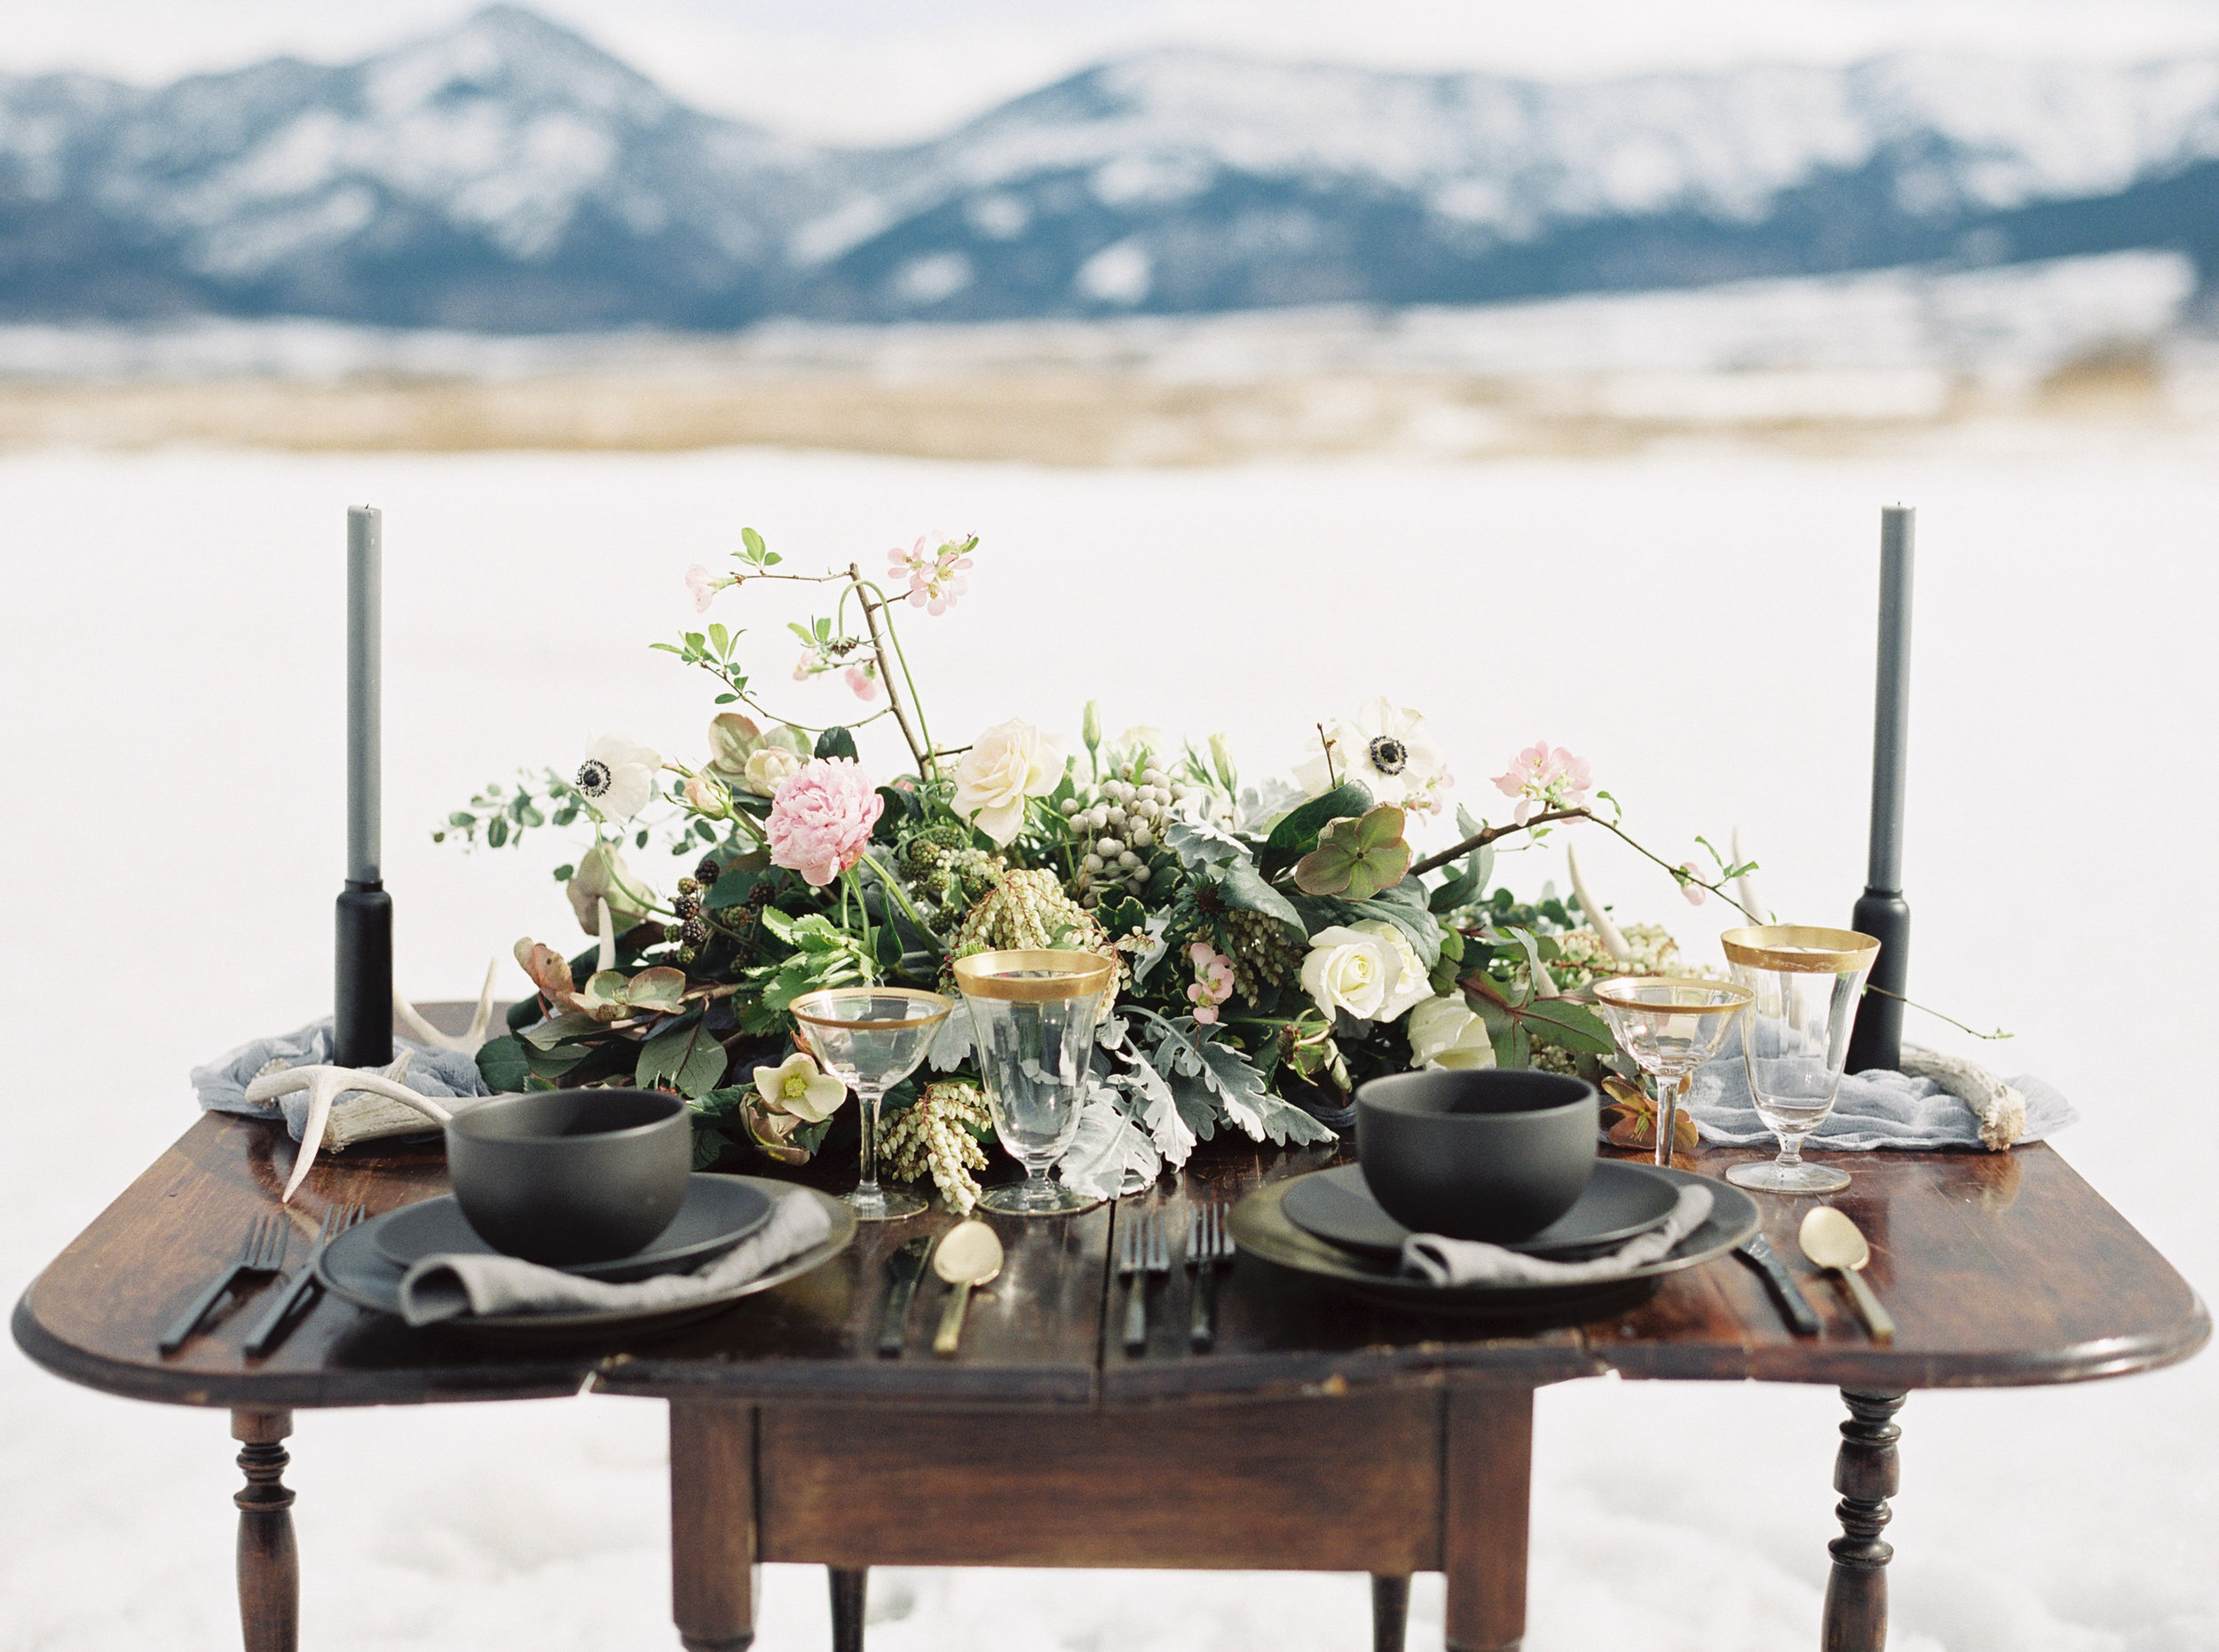 Photography: Simply Sarah Photography | Planning & Styling: Bash Bozeman | Calligraphy: Spurlé Gul Studio | Flowers: Labellum